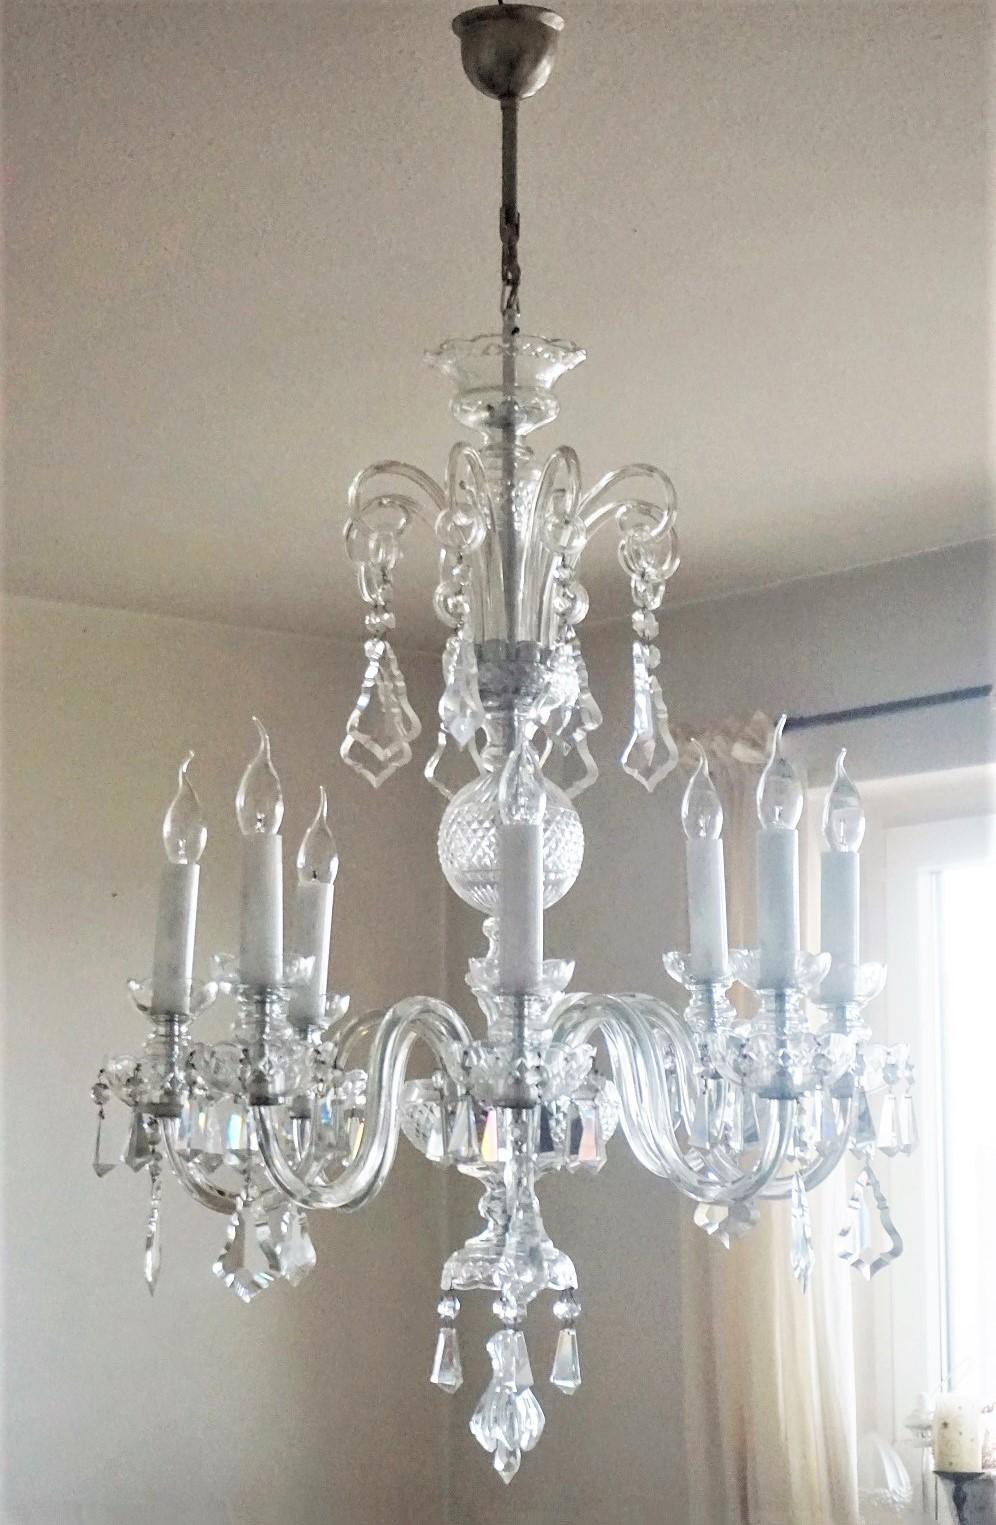 A rare original Venetian handcrafted crystal eight-light chandelier, Italy, 1910-1920. Eight hand blown Murano scroll lamp arms with candelabra light sockets surrounded by glass candle covers. This very elegant chandelier is decorated with eight